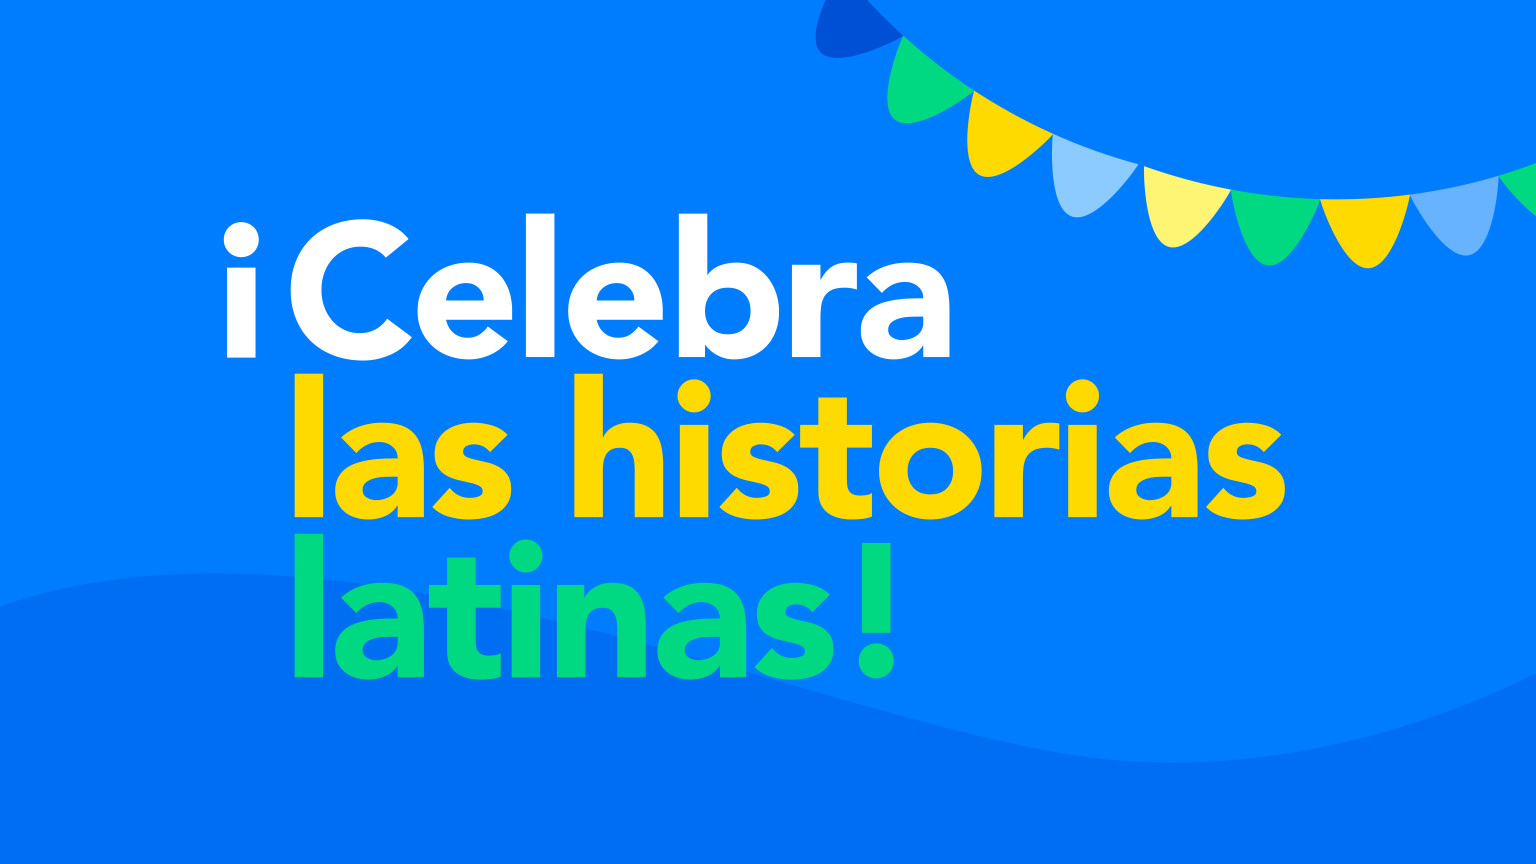 Illustrated graphic with text in Spanish saying "Celebrate latin histories"